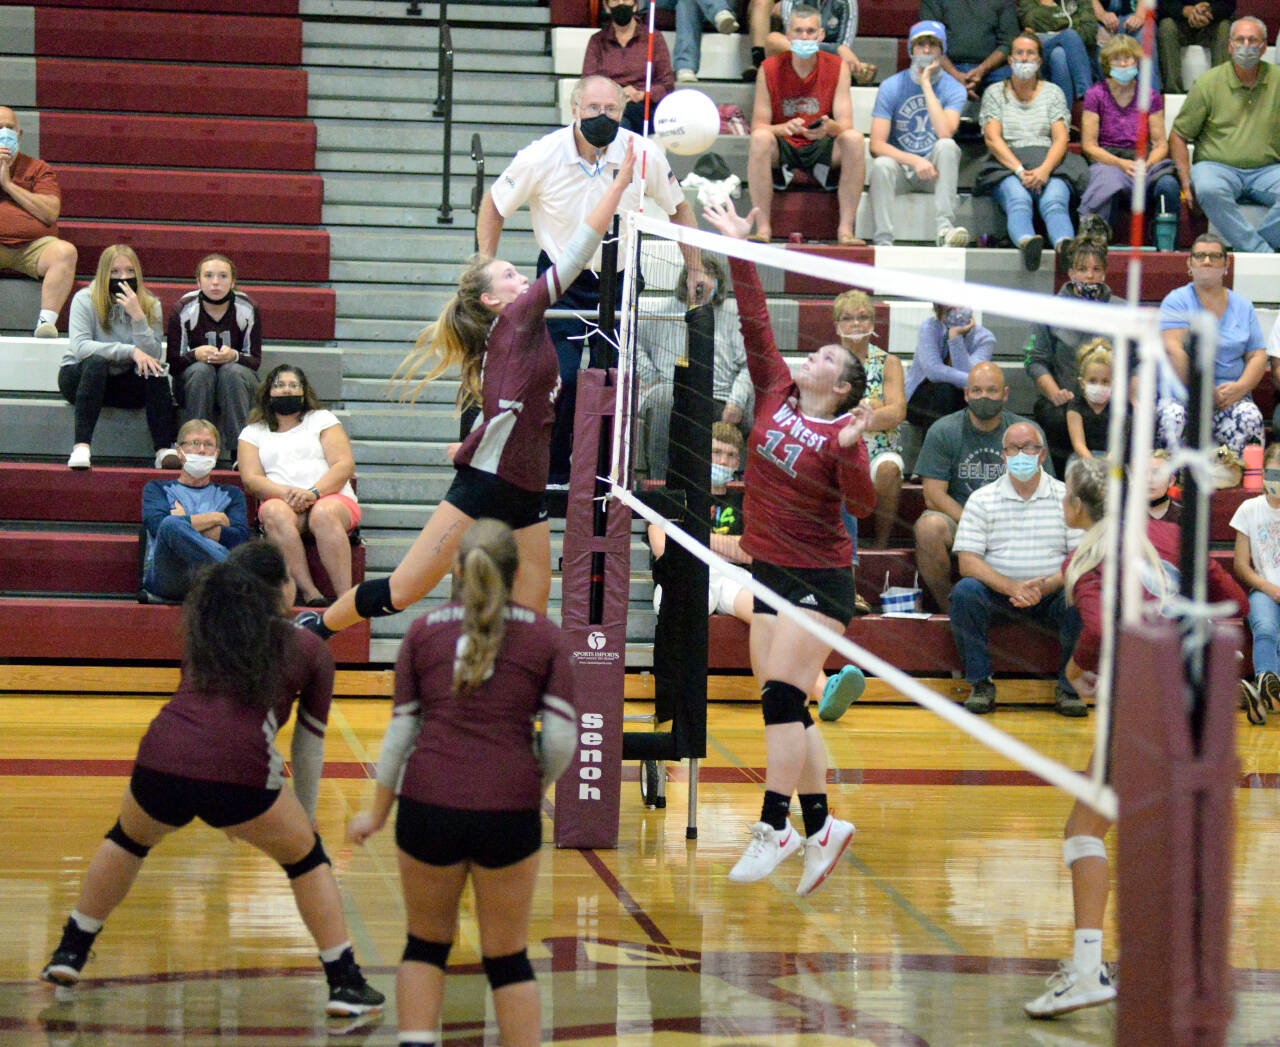 RYAN SPARKS | THE DAILY WORLD Montesano outside hitter Ashlyn Devereaux scores a points against WF West’s Savannah Hawkins during Tuesday’s match in Montesano. The Bulldogs won 3-2.